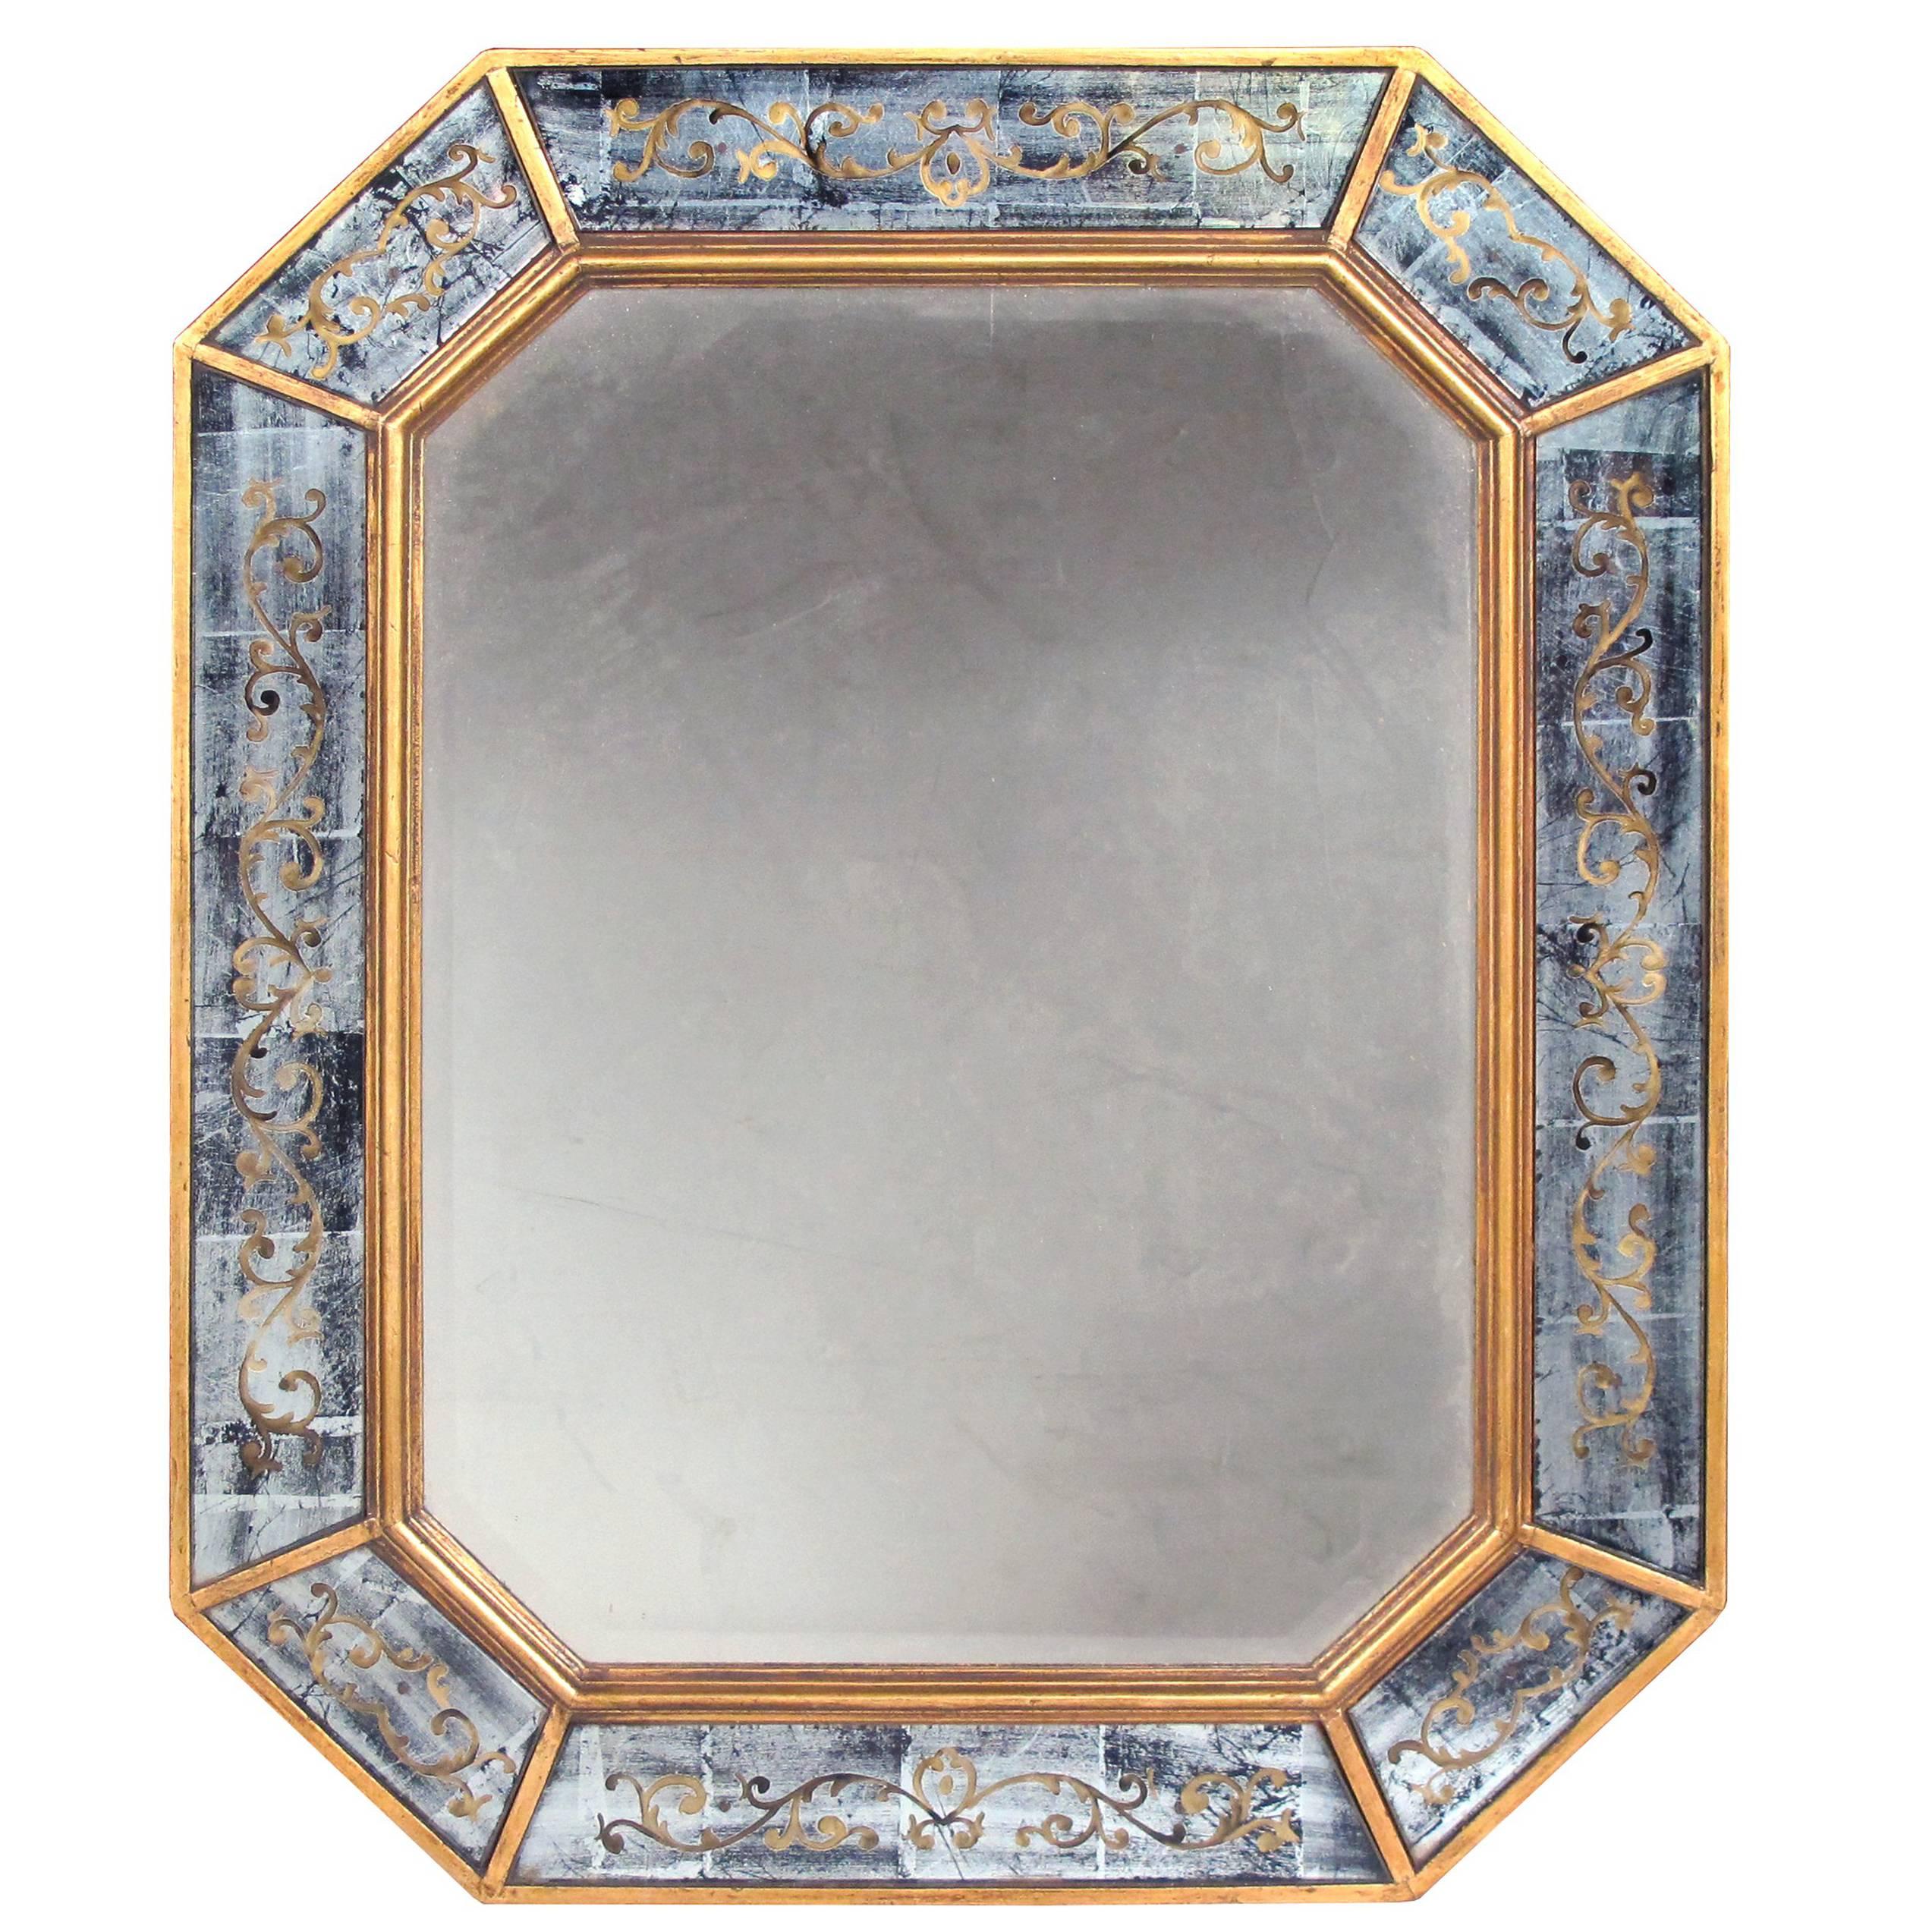 Chic French Maison Jansen 1940s Octagonal Giltwood and Eglomise Mirror